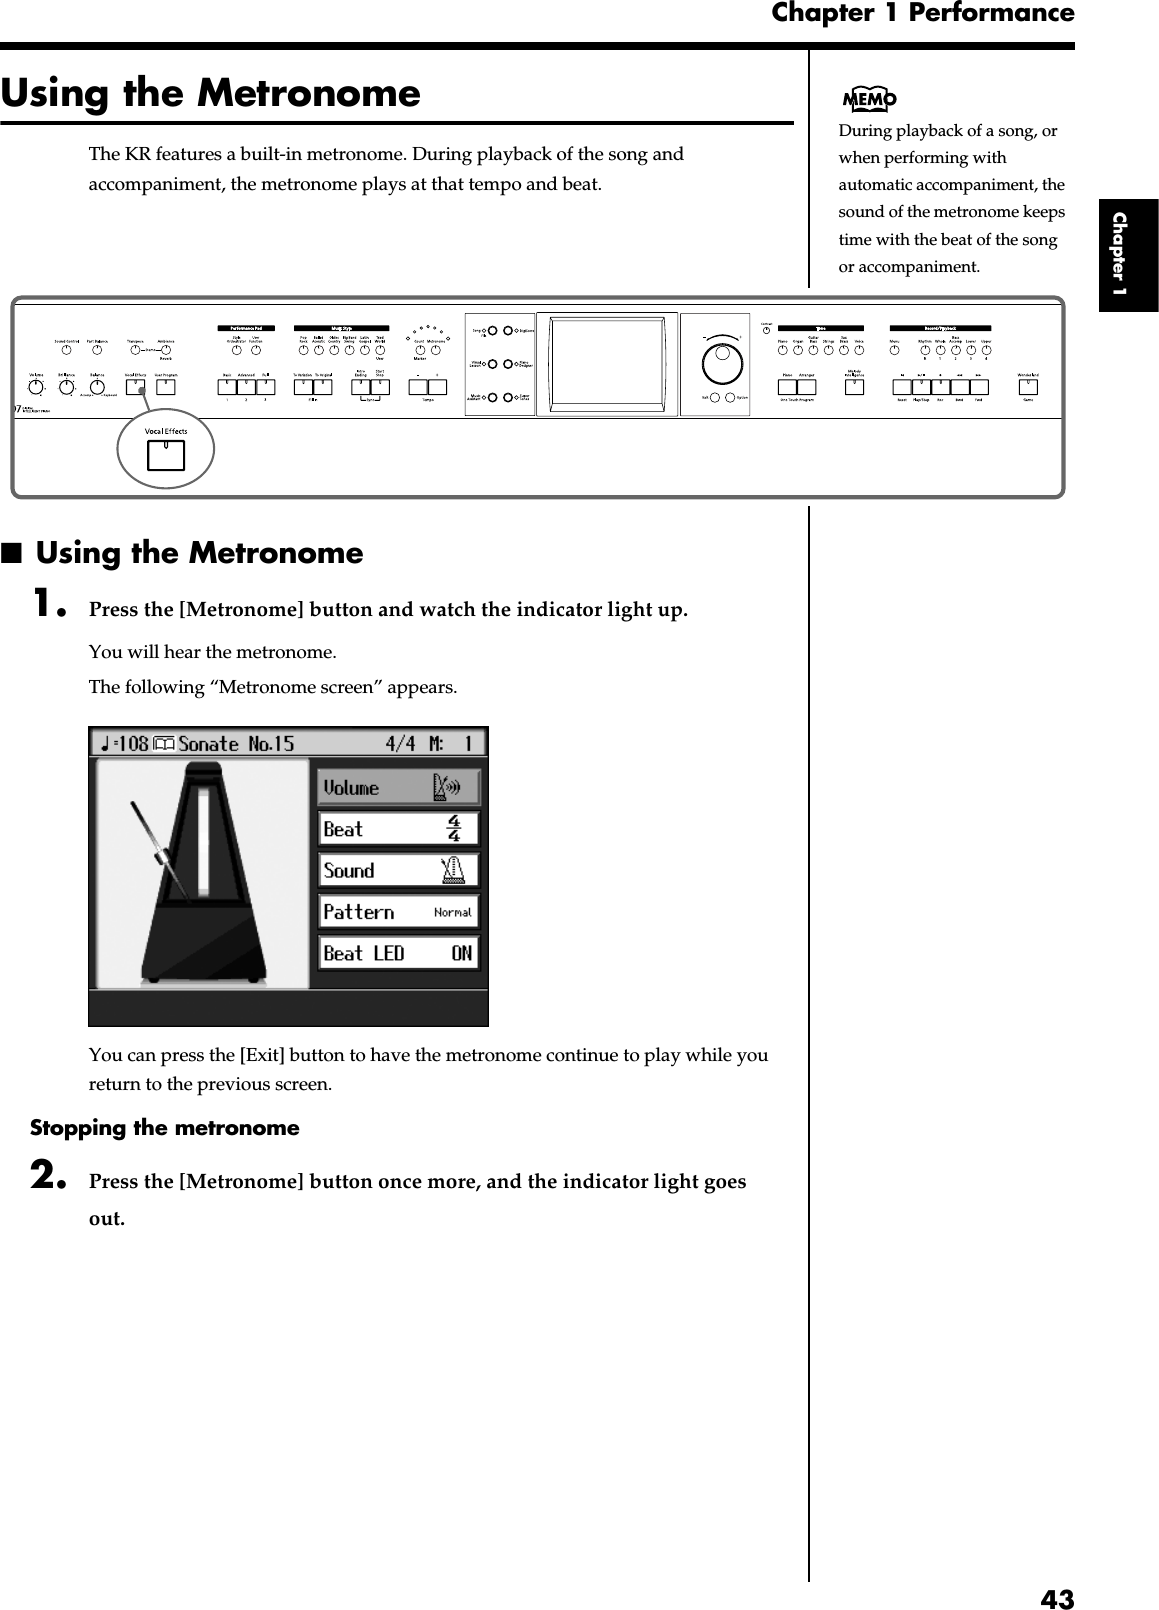 43Chapter 1 PerformanceChapter 1Using the MetronomeThe KR features a built-in metronome. During playback of the song and accompaniment, the metronome plays at that tempo and beat.fig.panel1-6■Using the Metronome1. Press the [Metronome] button and watch the indicator light up.You will hear the metronome.The following “Metronome screen” appears.fig.d-metro.eps_60You can press the [Exit] button to have the metronome continue to play while you return to the previous screen.Stopping the metronome2. Press the [Metronome] button once more, and the indicator light goes out.During playback of a song, or when performing with automatic accompaniment, the sound of the metronome keeps time with the beat of the song or accompaniment.